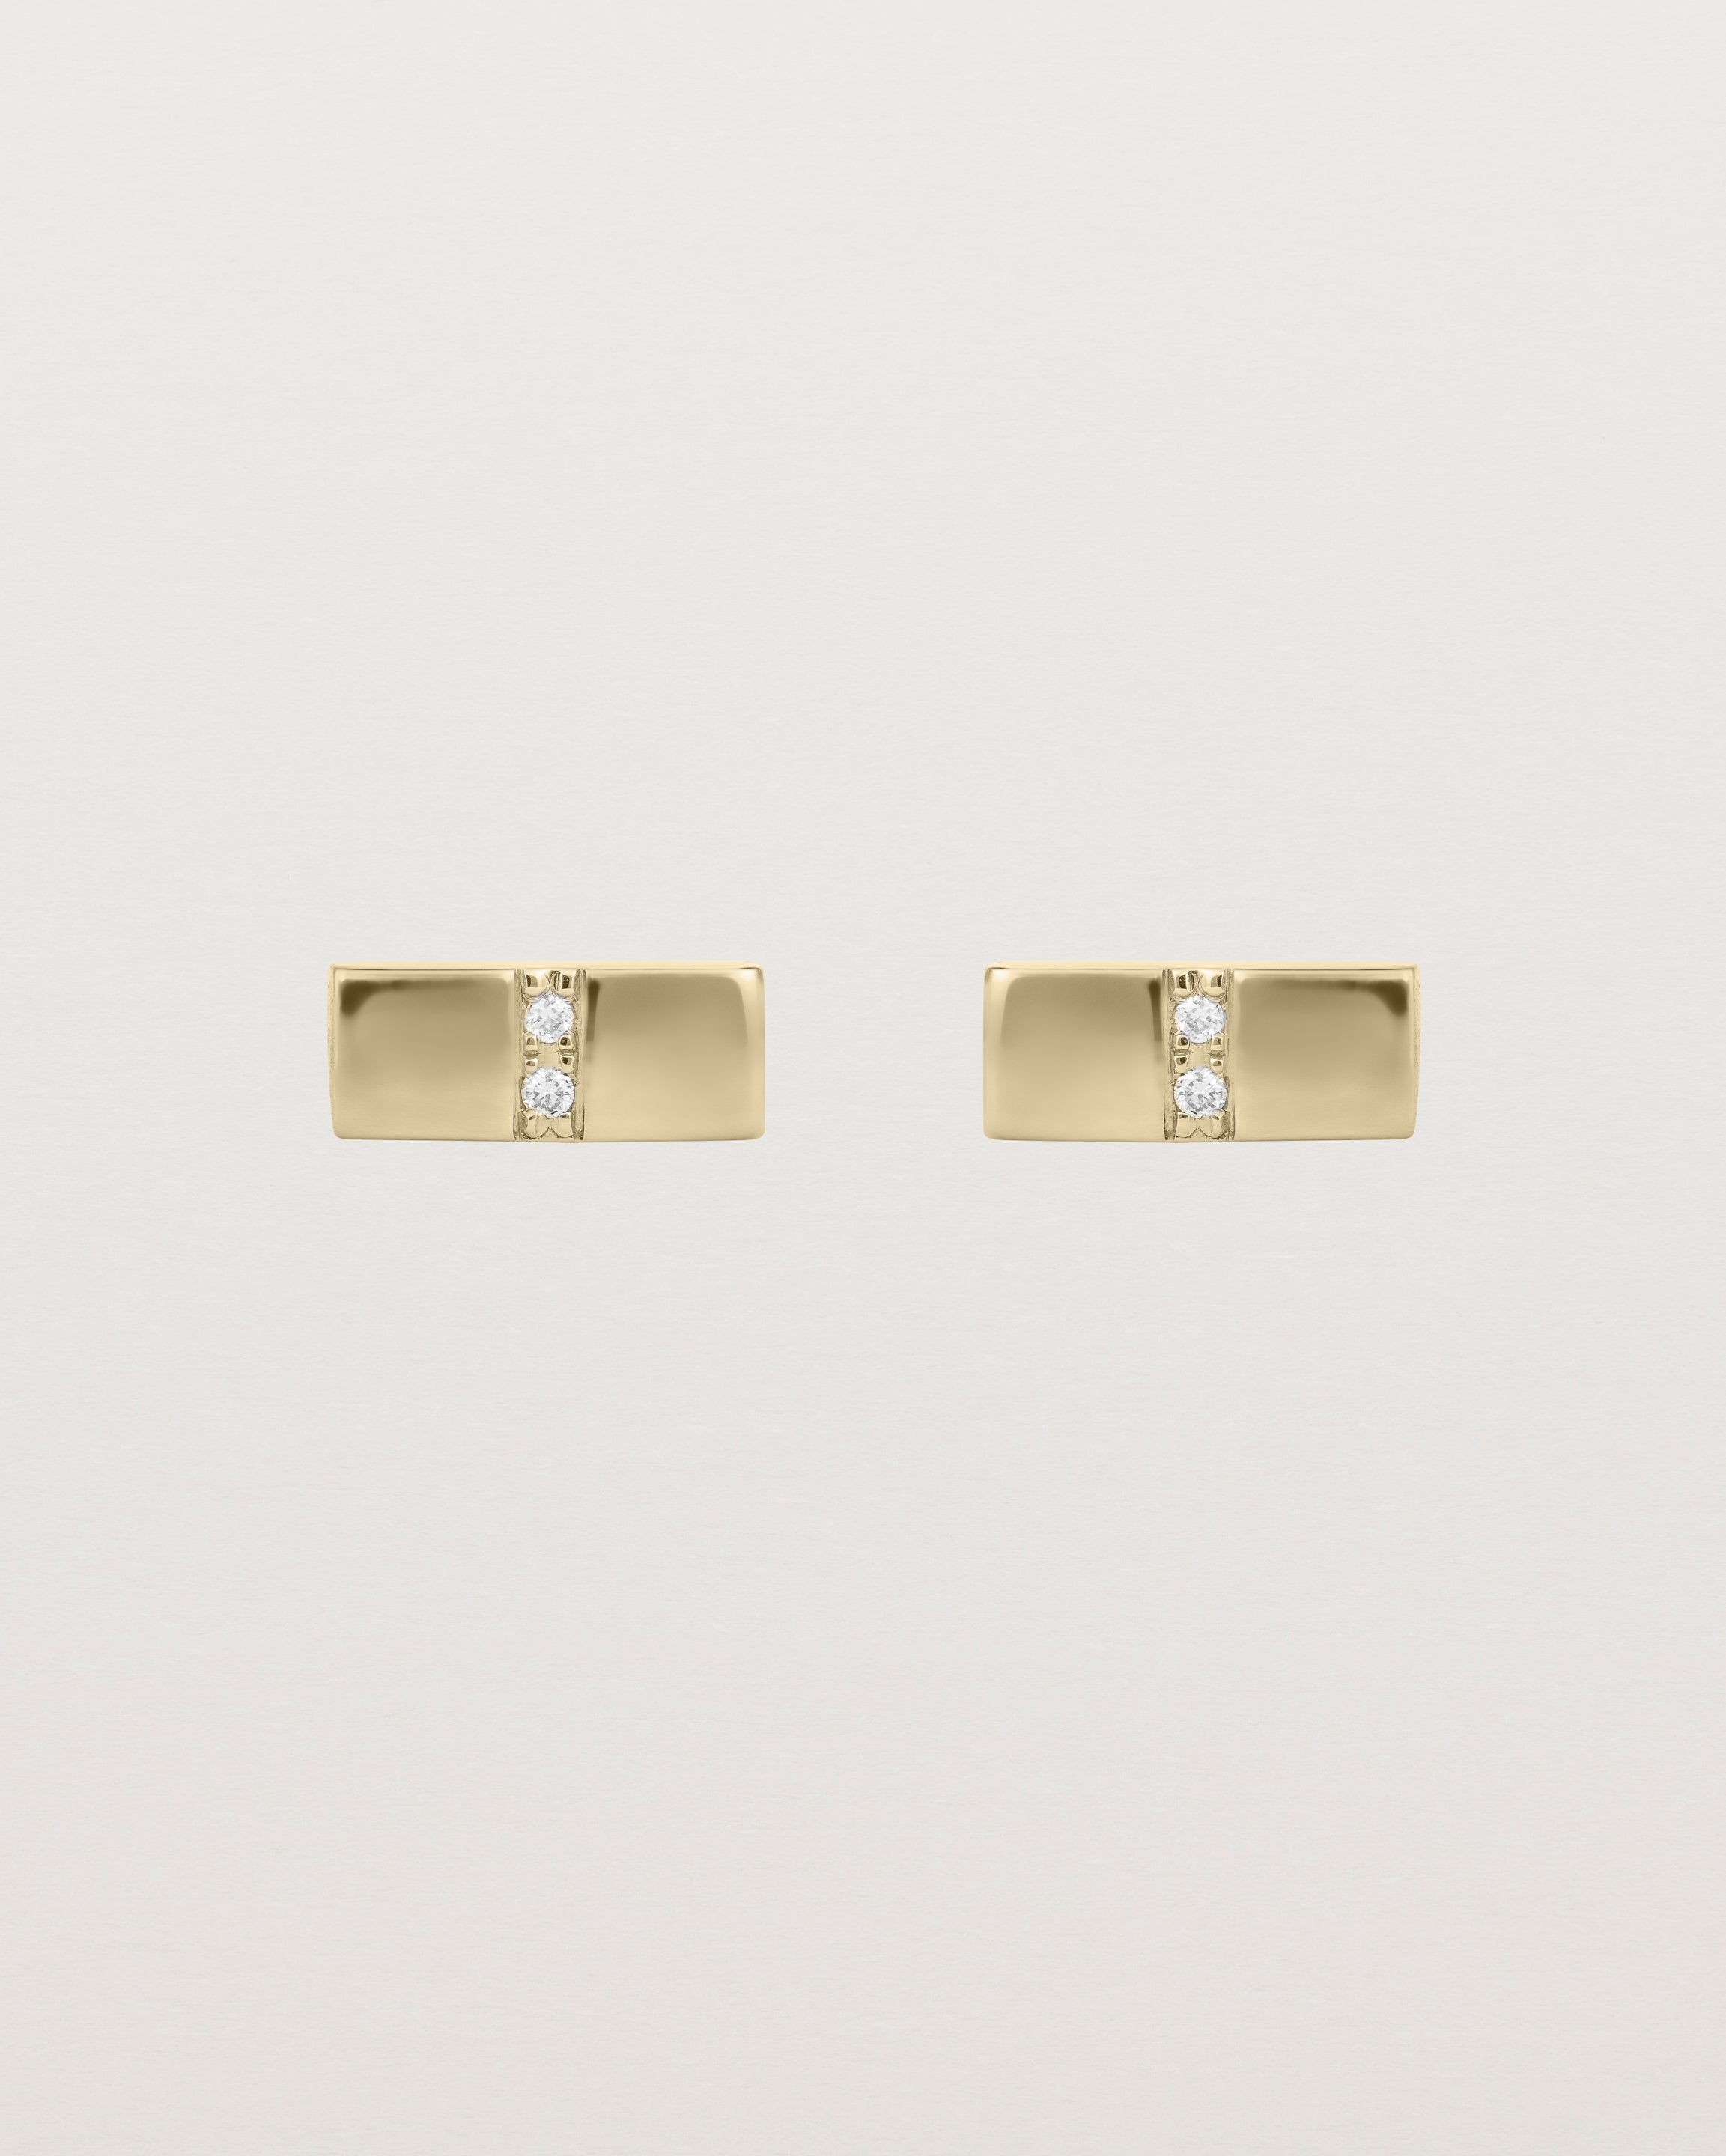 A pair of small yellow gold rectangle studs featuring two white diamonds set in the centre